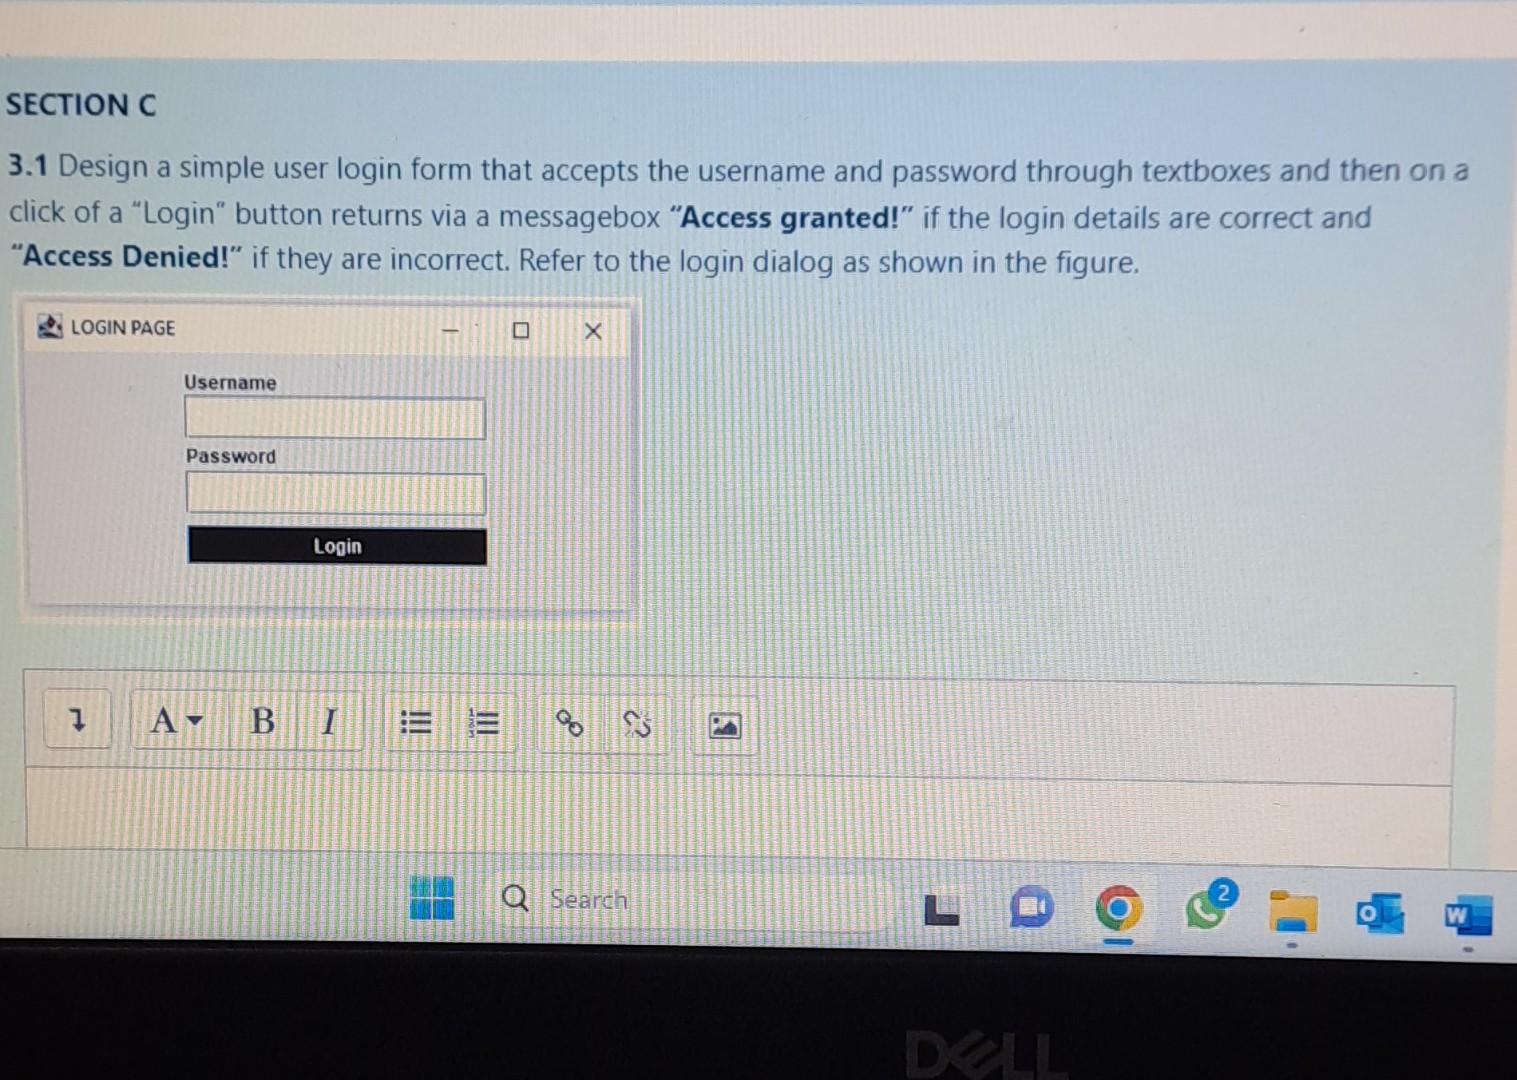 Design a simple user login form that accepts the username and password through textboxes. On clicking a "Login" button, display a messagebox with the message "Access granted!" if the login details are correct. Display "Access Denied!" if the login details are incorrect. Refer to the login dialog shown in the figure.